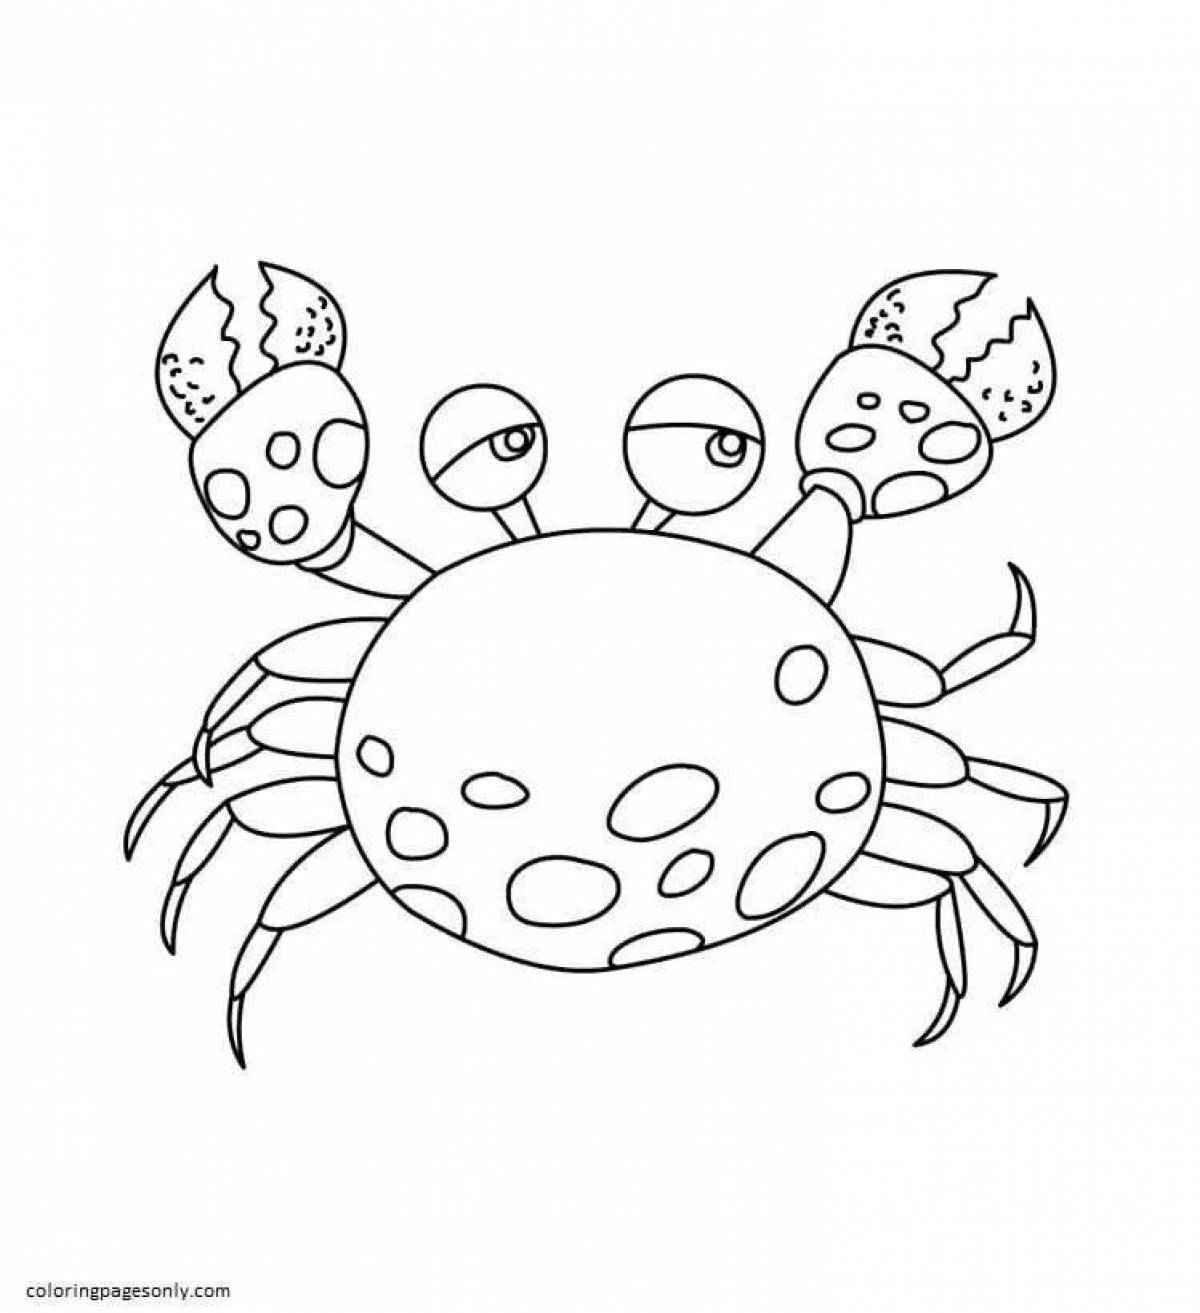 Coloring book smart crab for kids